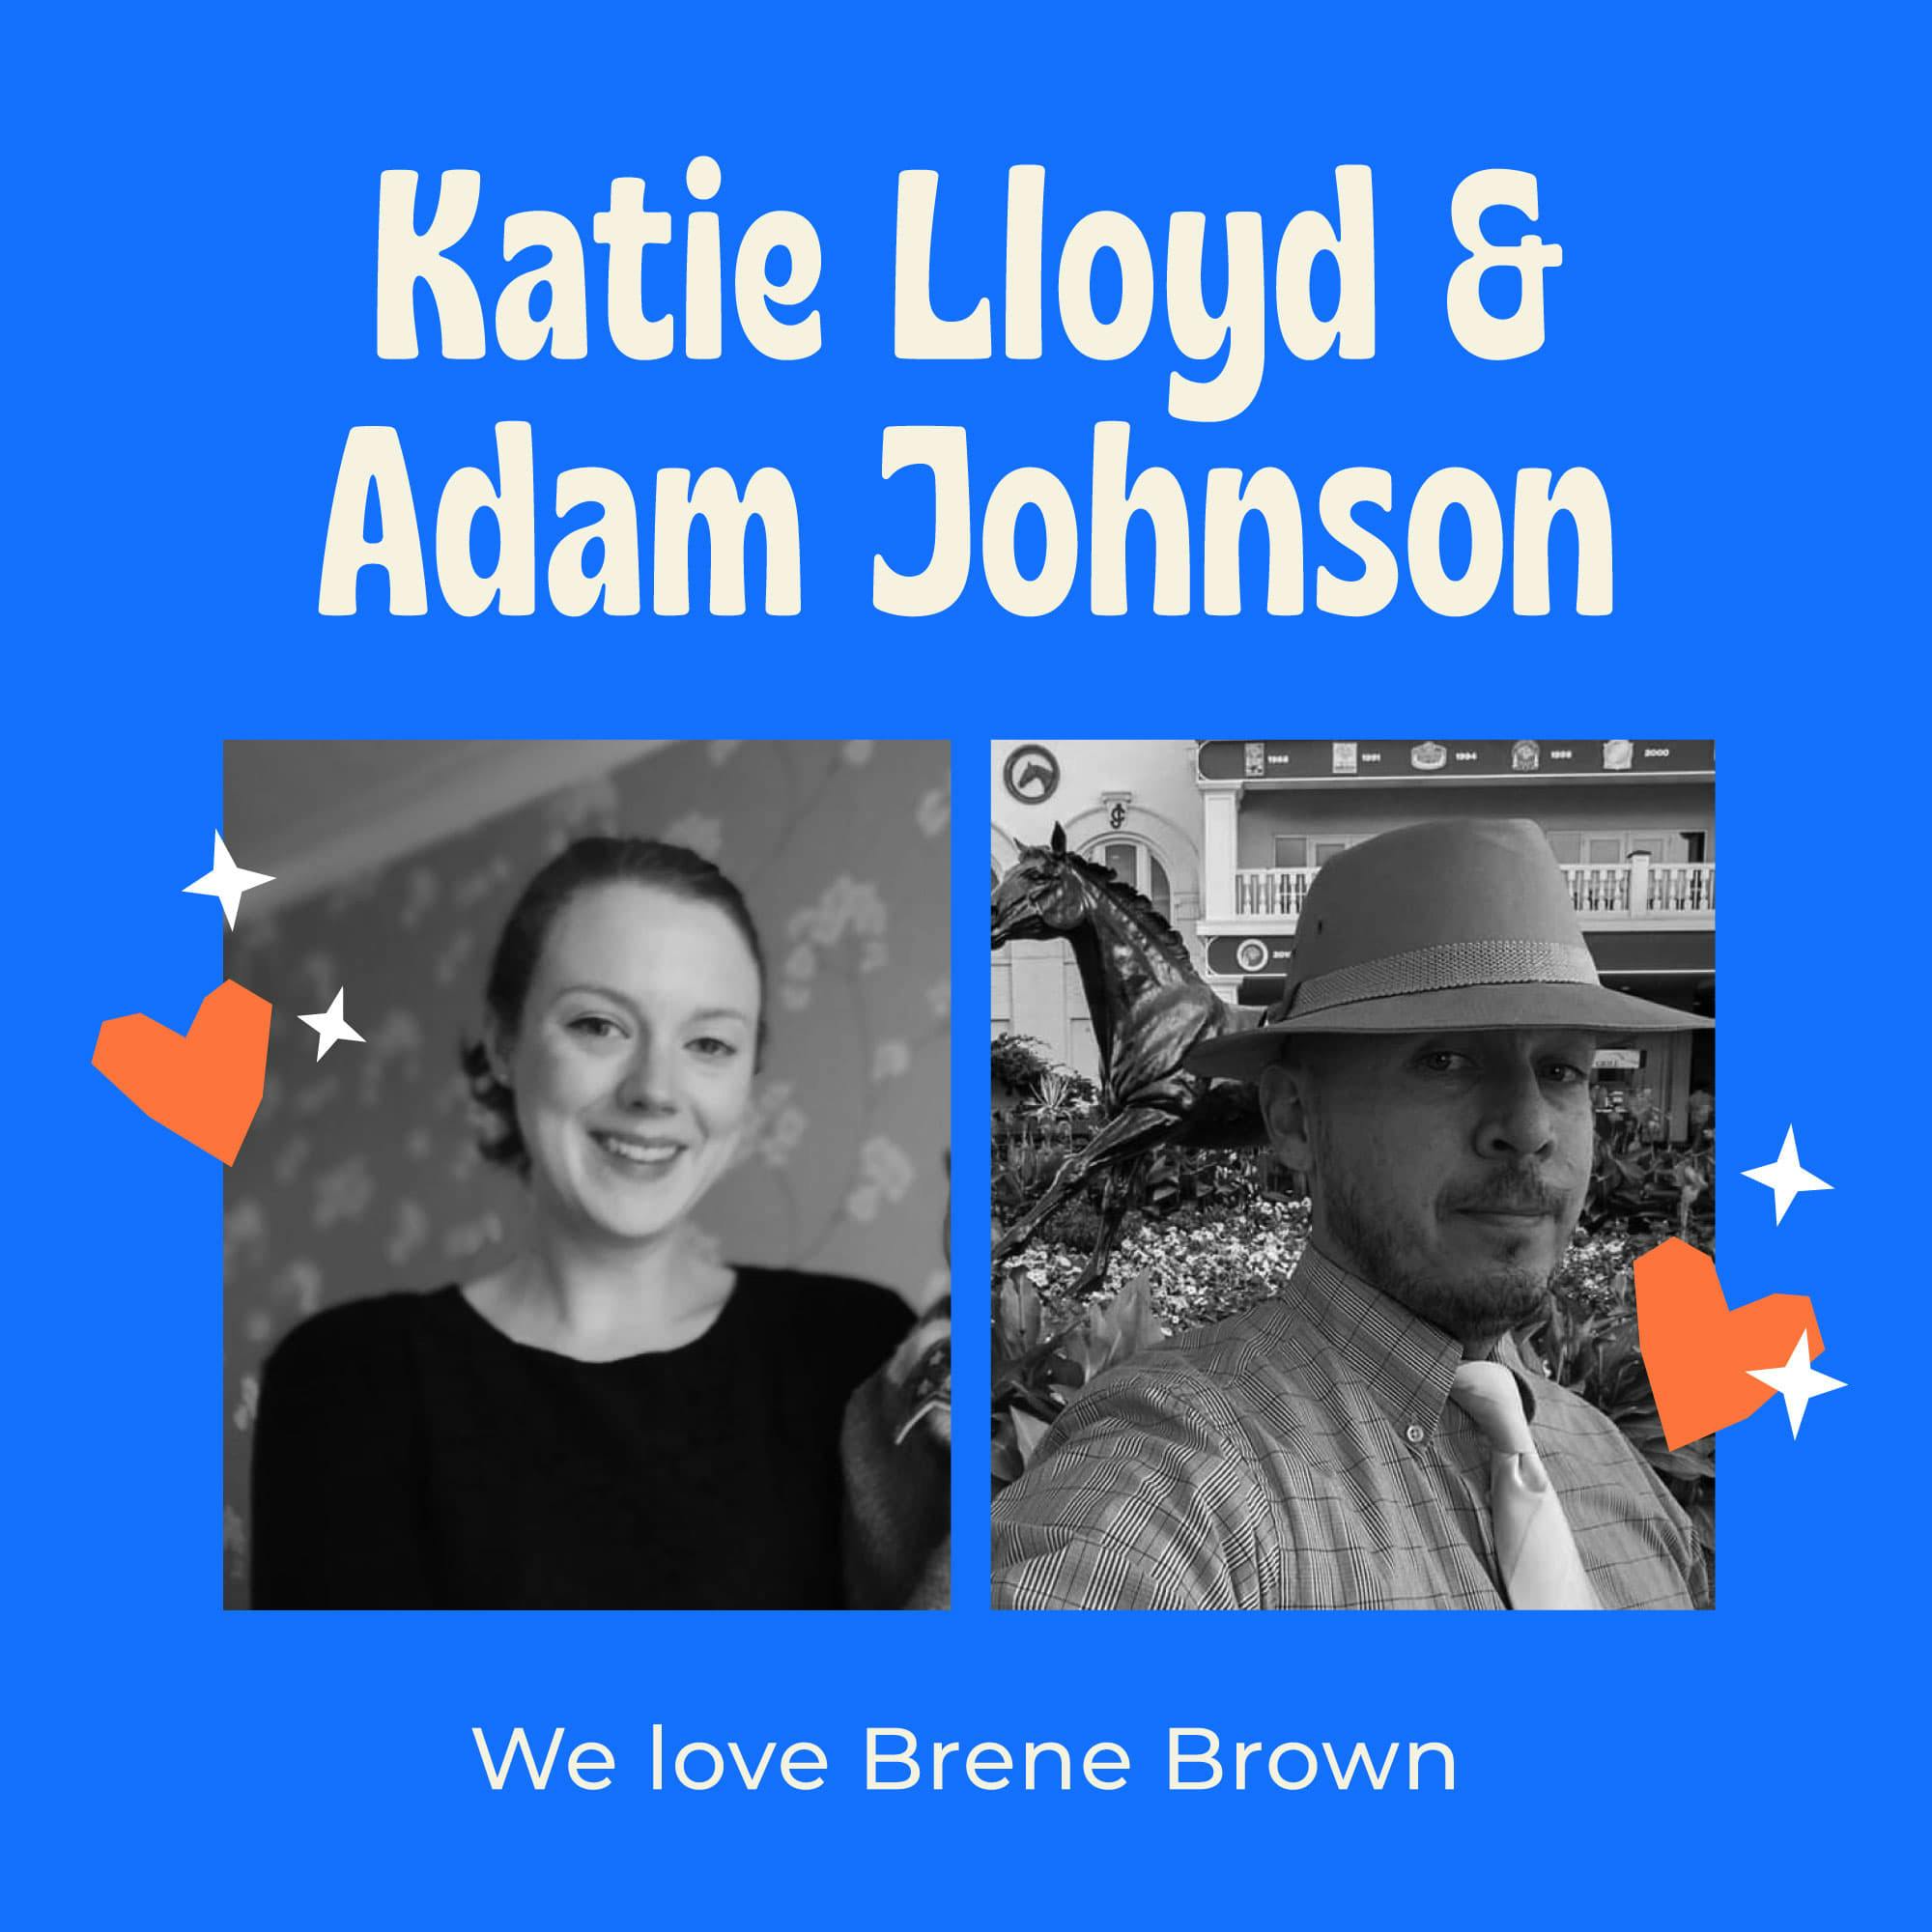 Rare Friends Forever – Hanging Out and Showing Some Love to Brene Brown with Katie Lloyd and Adam Johnson